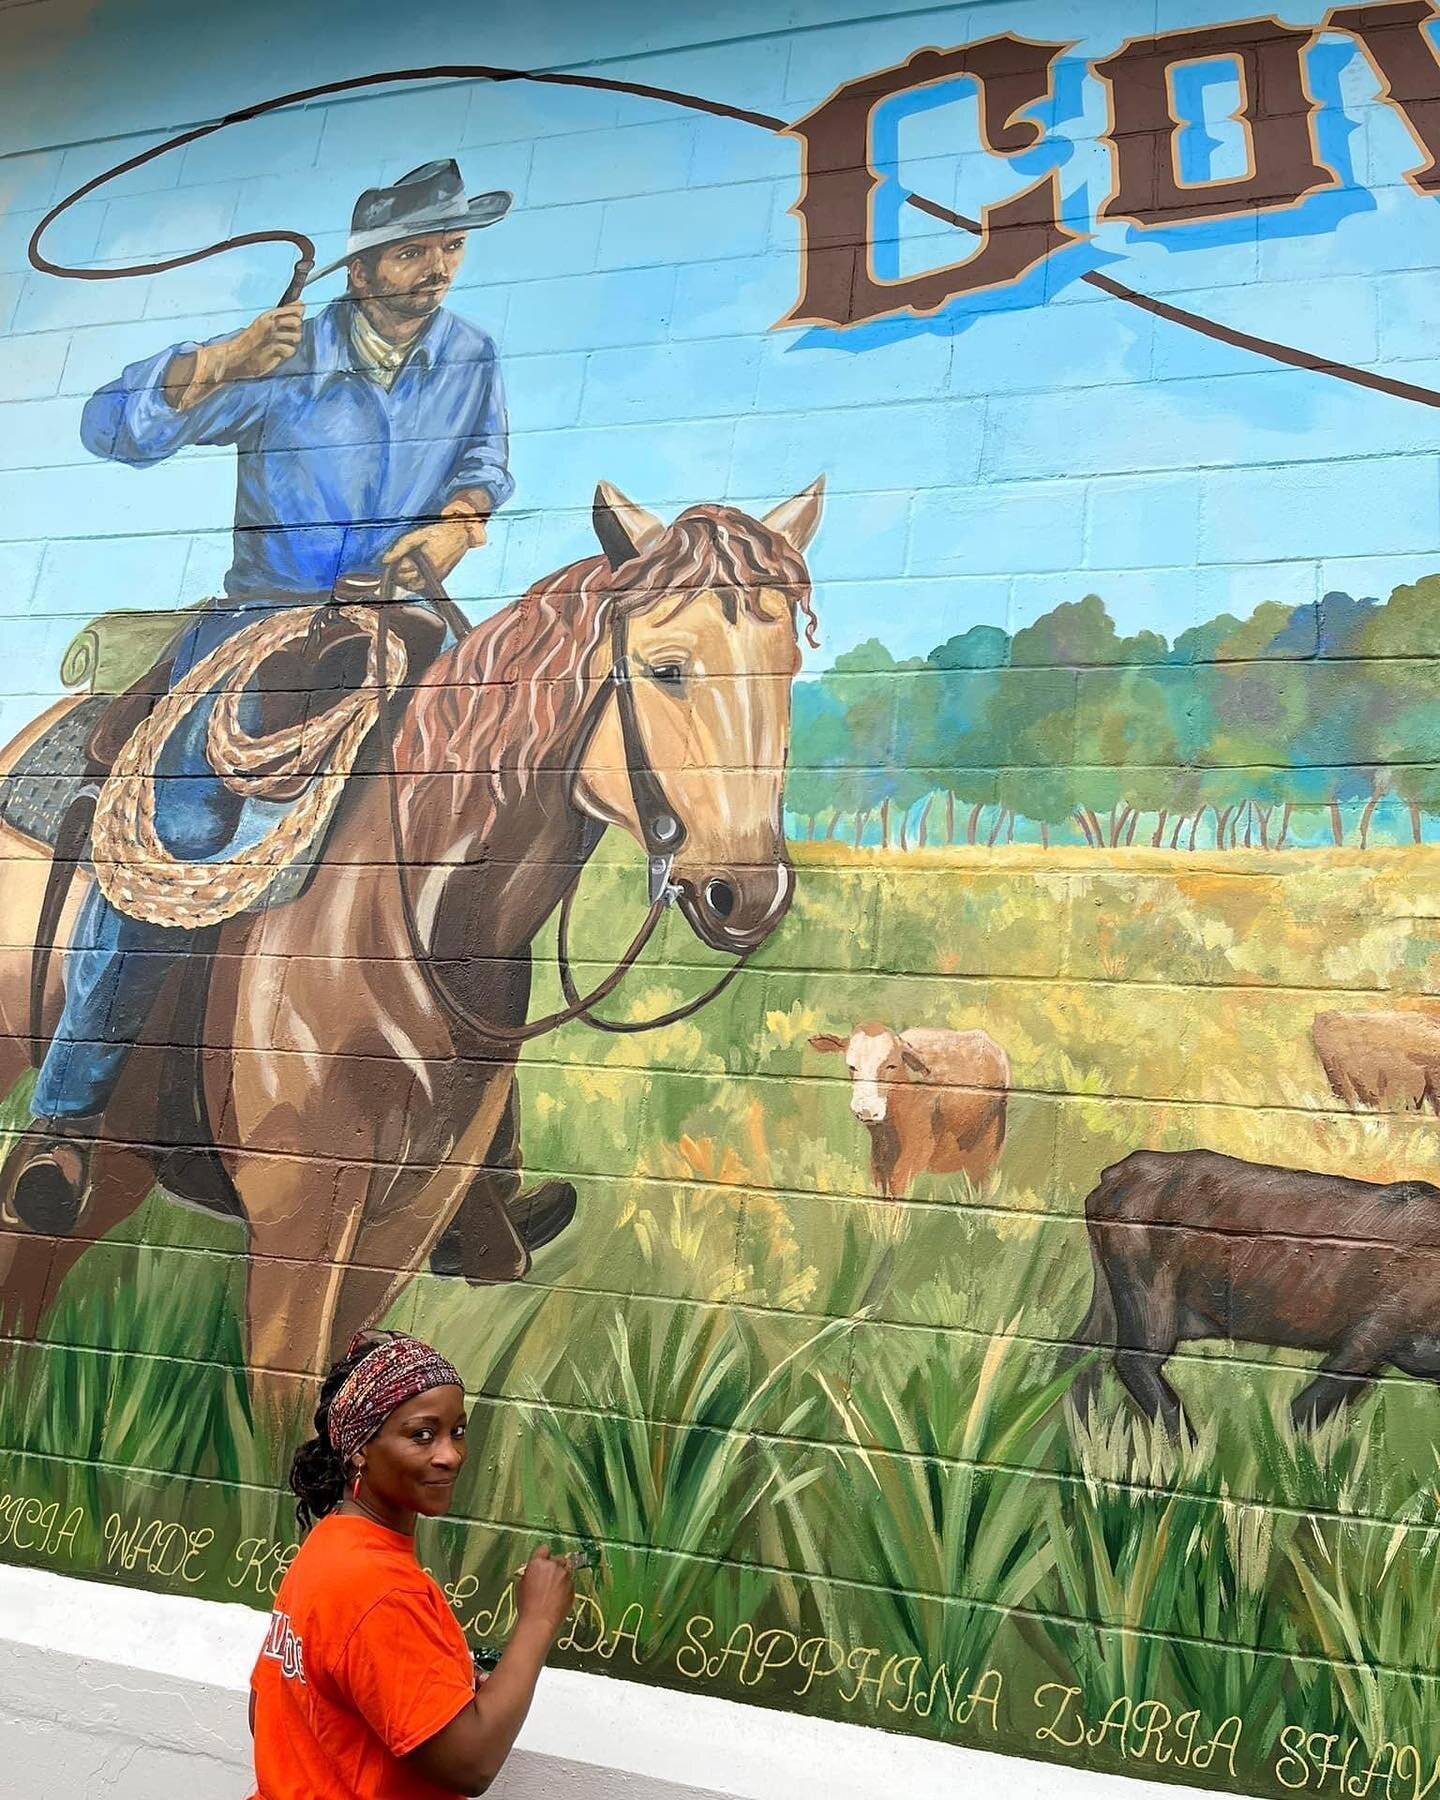 I had a wonderful time painting with The Walldogs in High Springs, FL. It was great to see everyone, again. I painted with Alicia Rheal, Wade Lambrigtsen, and crew. Ours was one of ten historical Murals painted in four days. Florida Cowboys Cattle &a